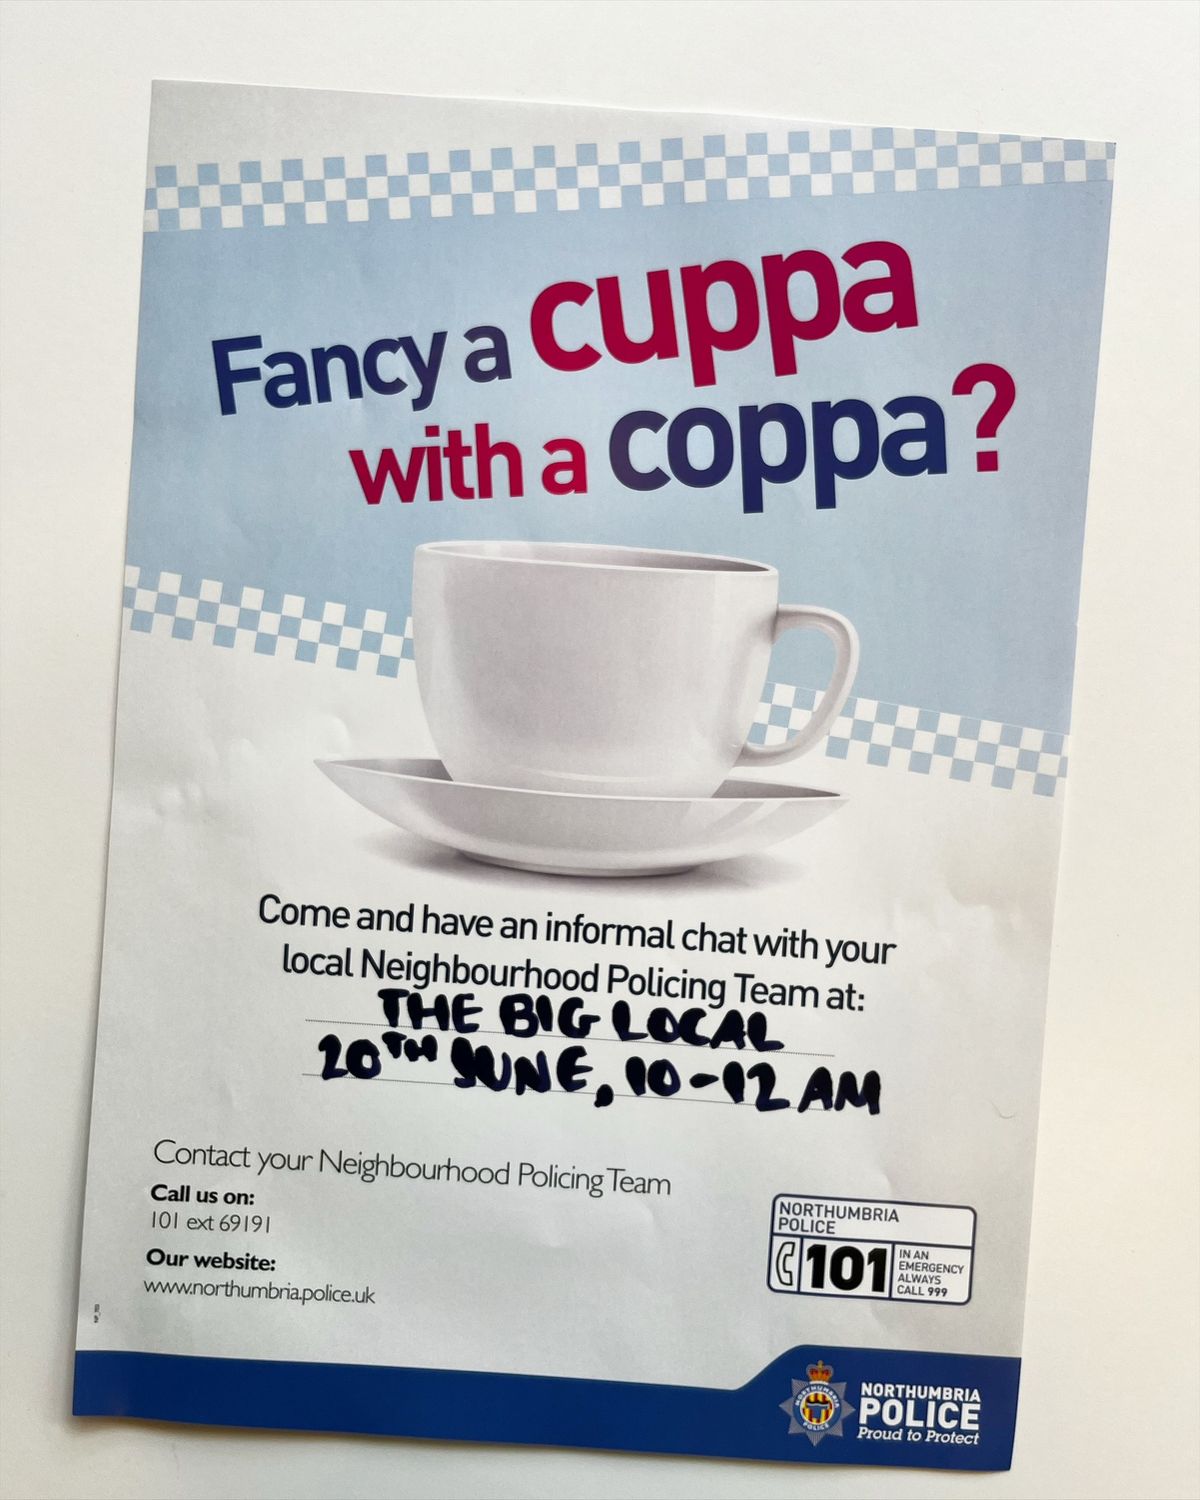 Fancy a cuppa with a coppa? 